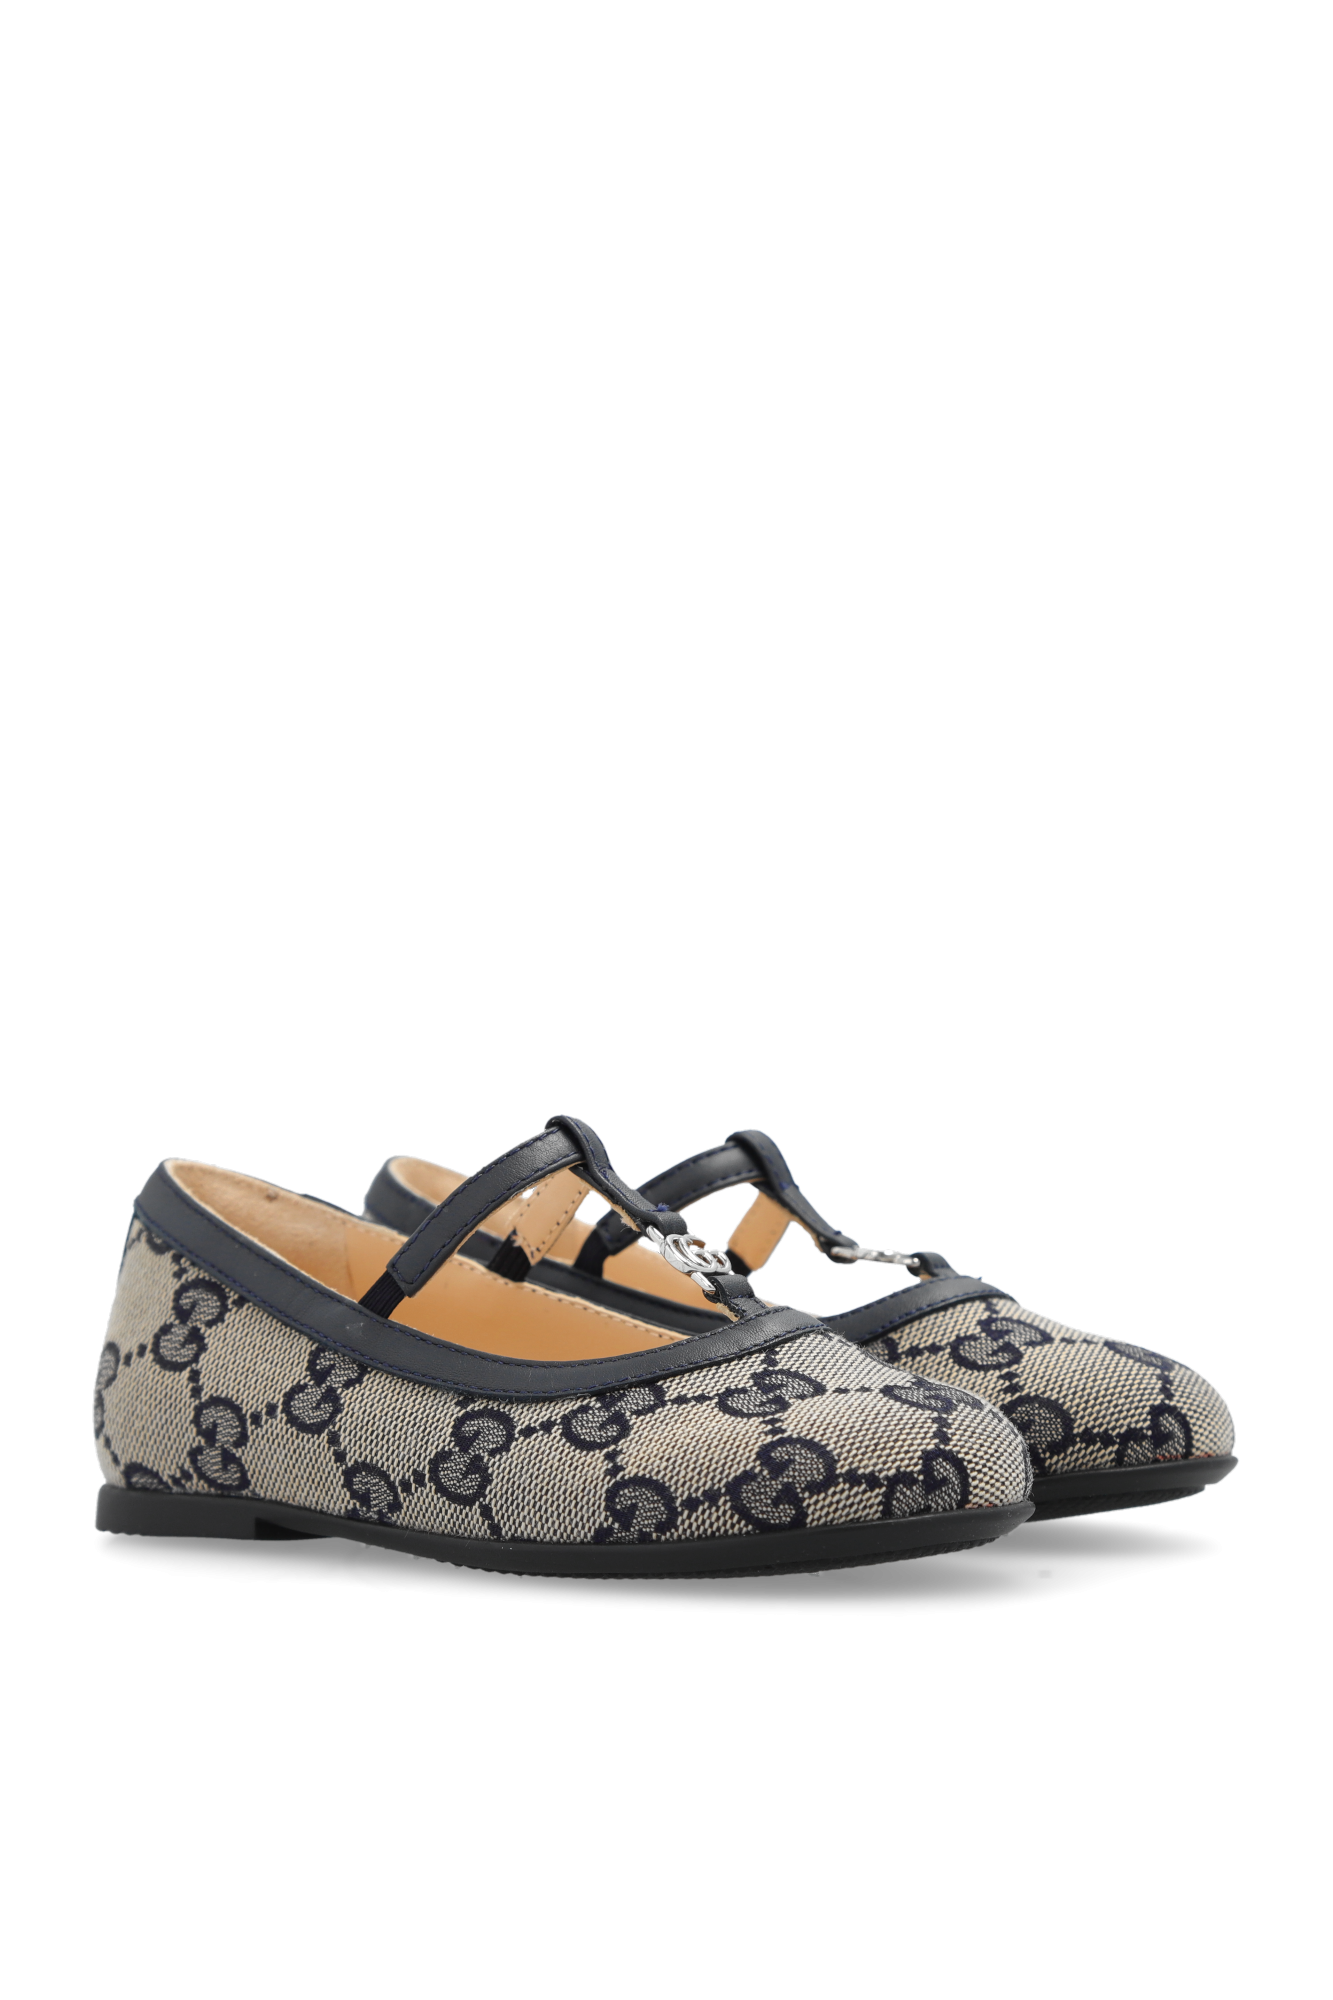 Gucci Kids Ballet flats with monogram